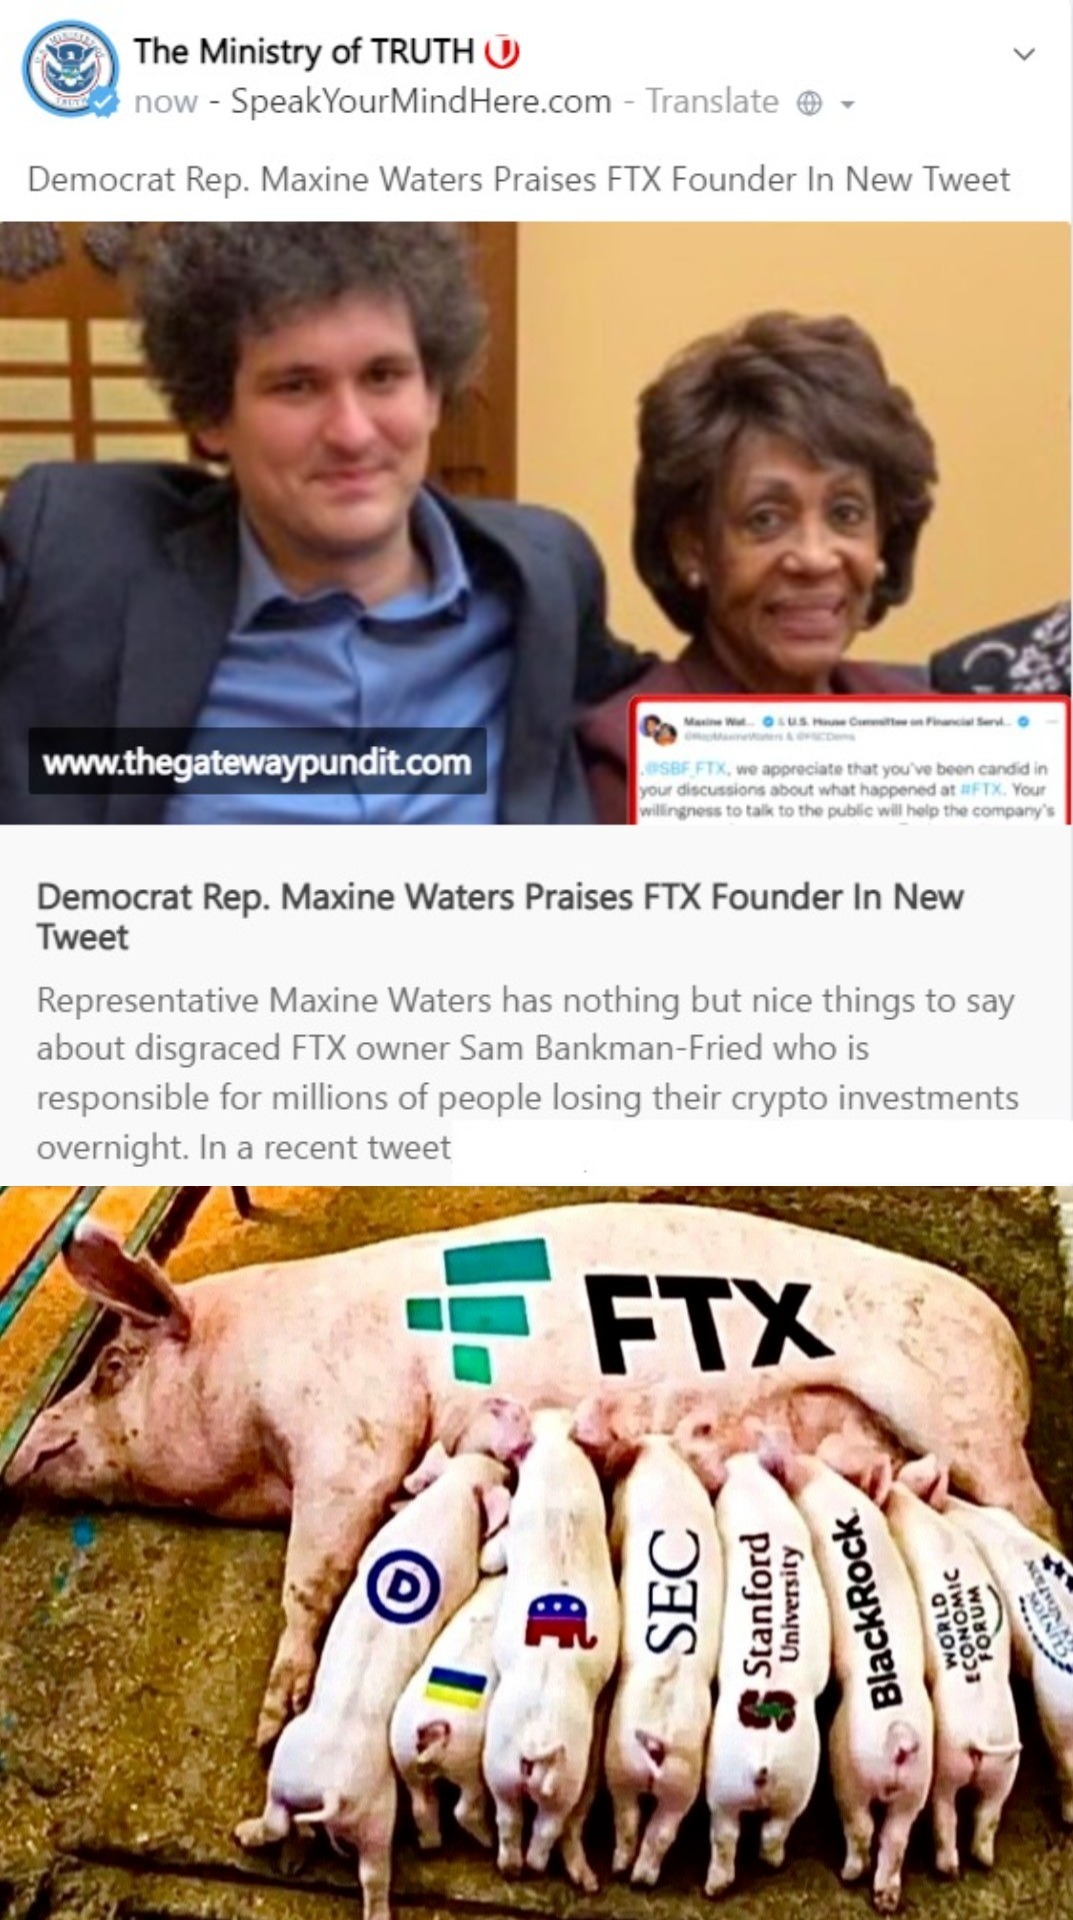 Add Maxine Waters to the List of Uniparty Piglets Suckling on the FTX Cash Sow | image tagged in uniparty piglets,sbf,ftx,cash cow,cash sow,government corruption | made w/ Imgflip meme maker